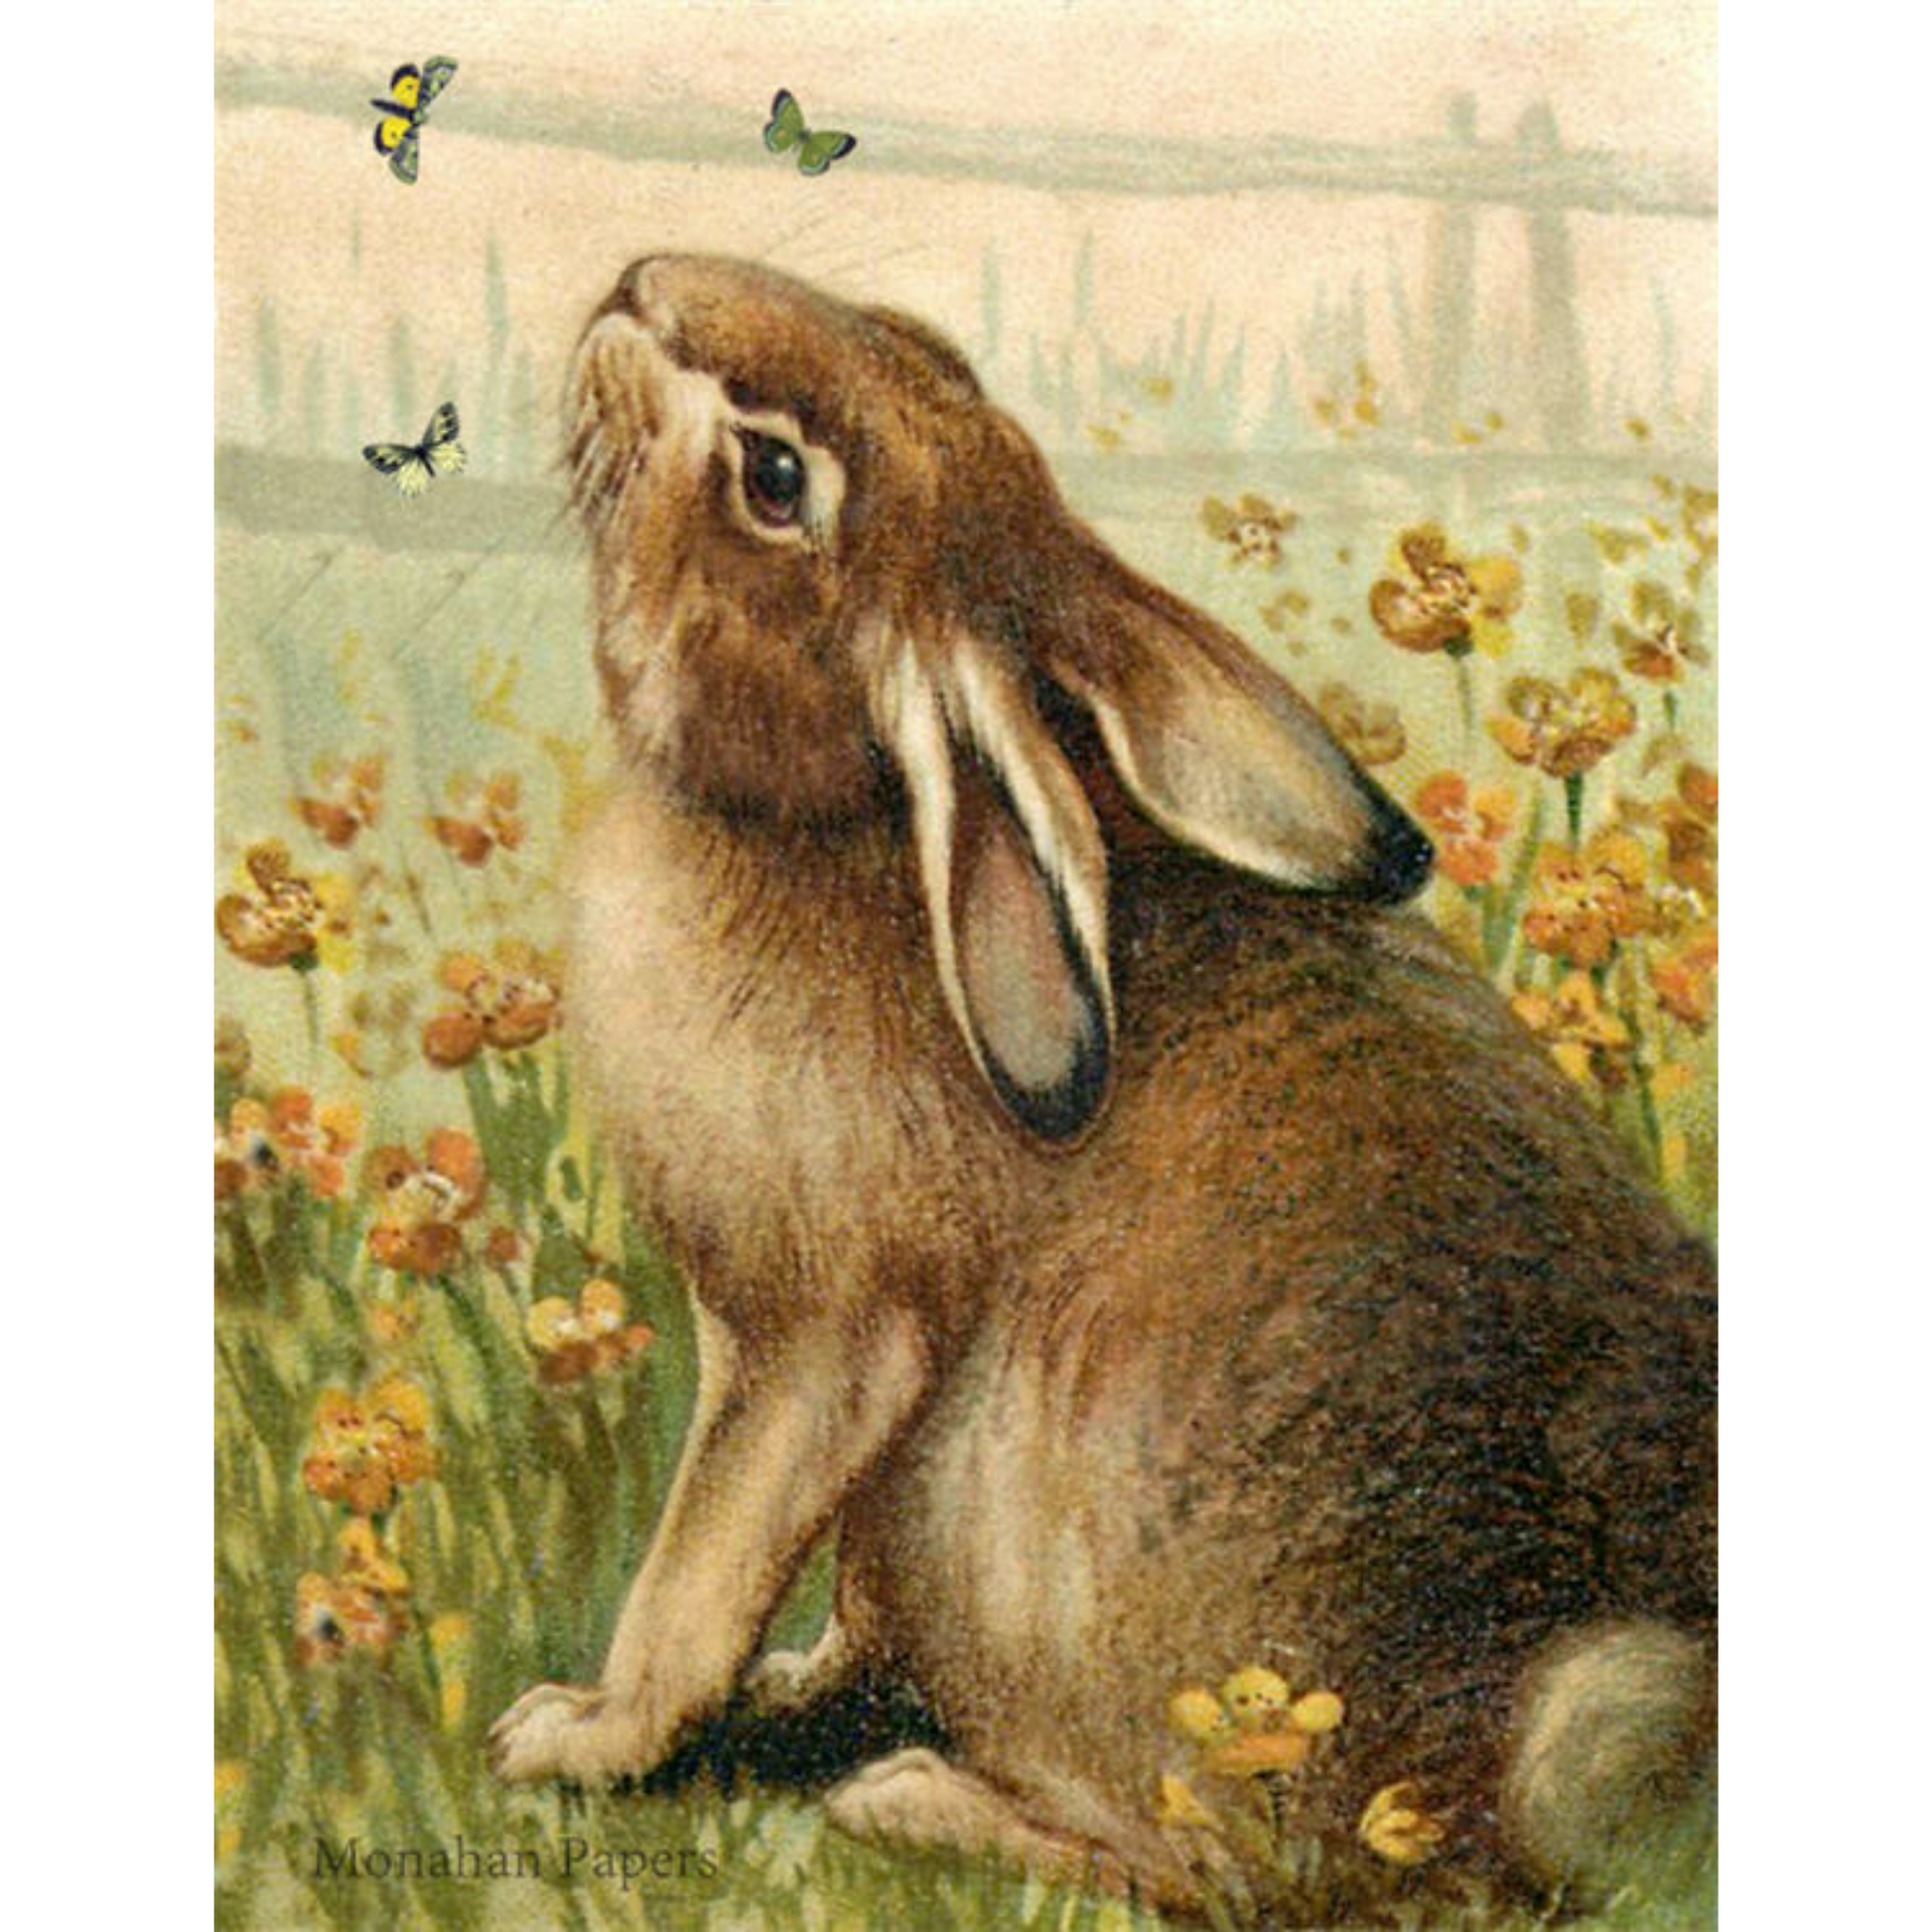 "Bunny and Butterflies" Decoupage Paper by Monahan Papers. Size 11" x 17" available at Milton's Daughter.